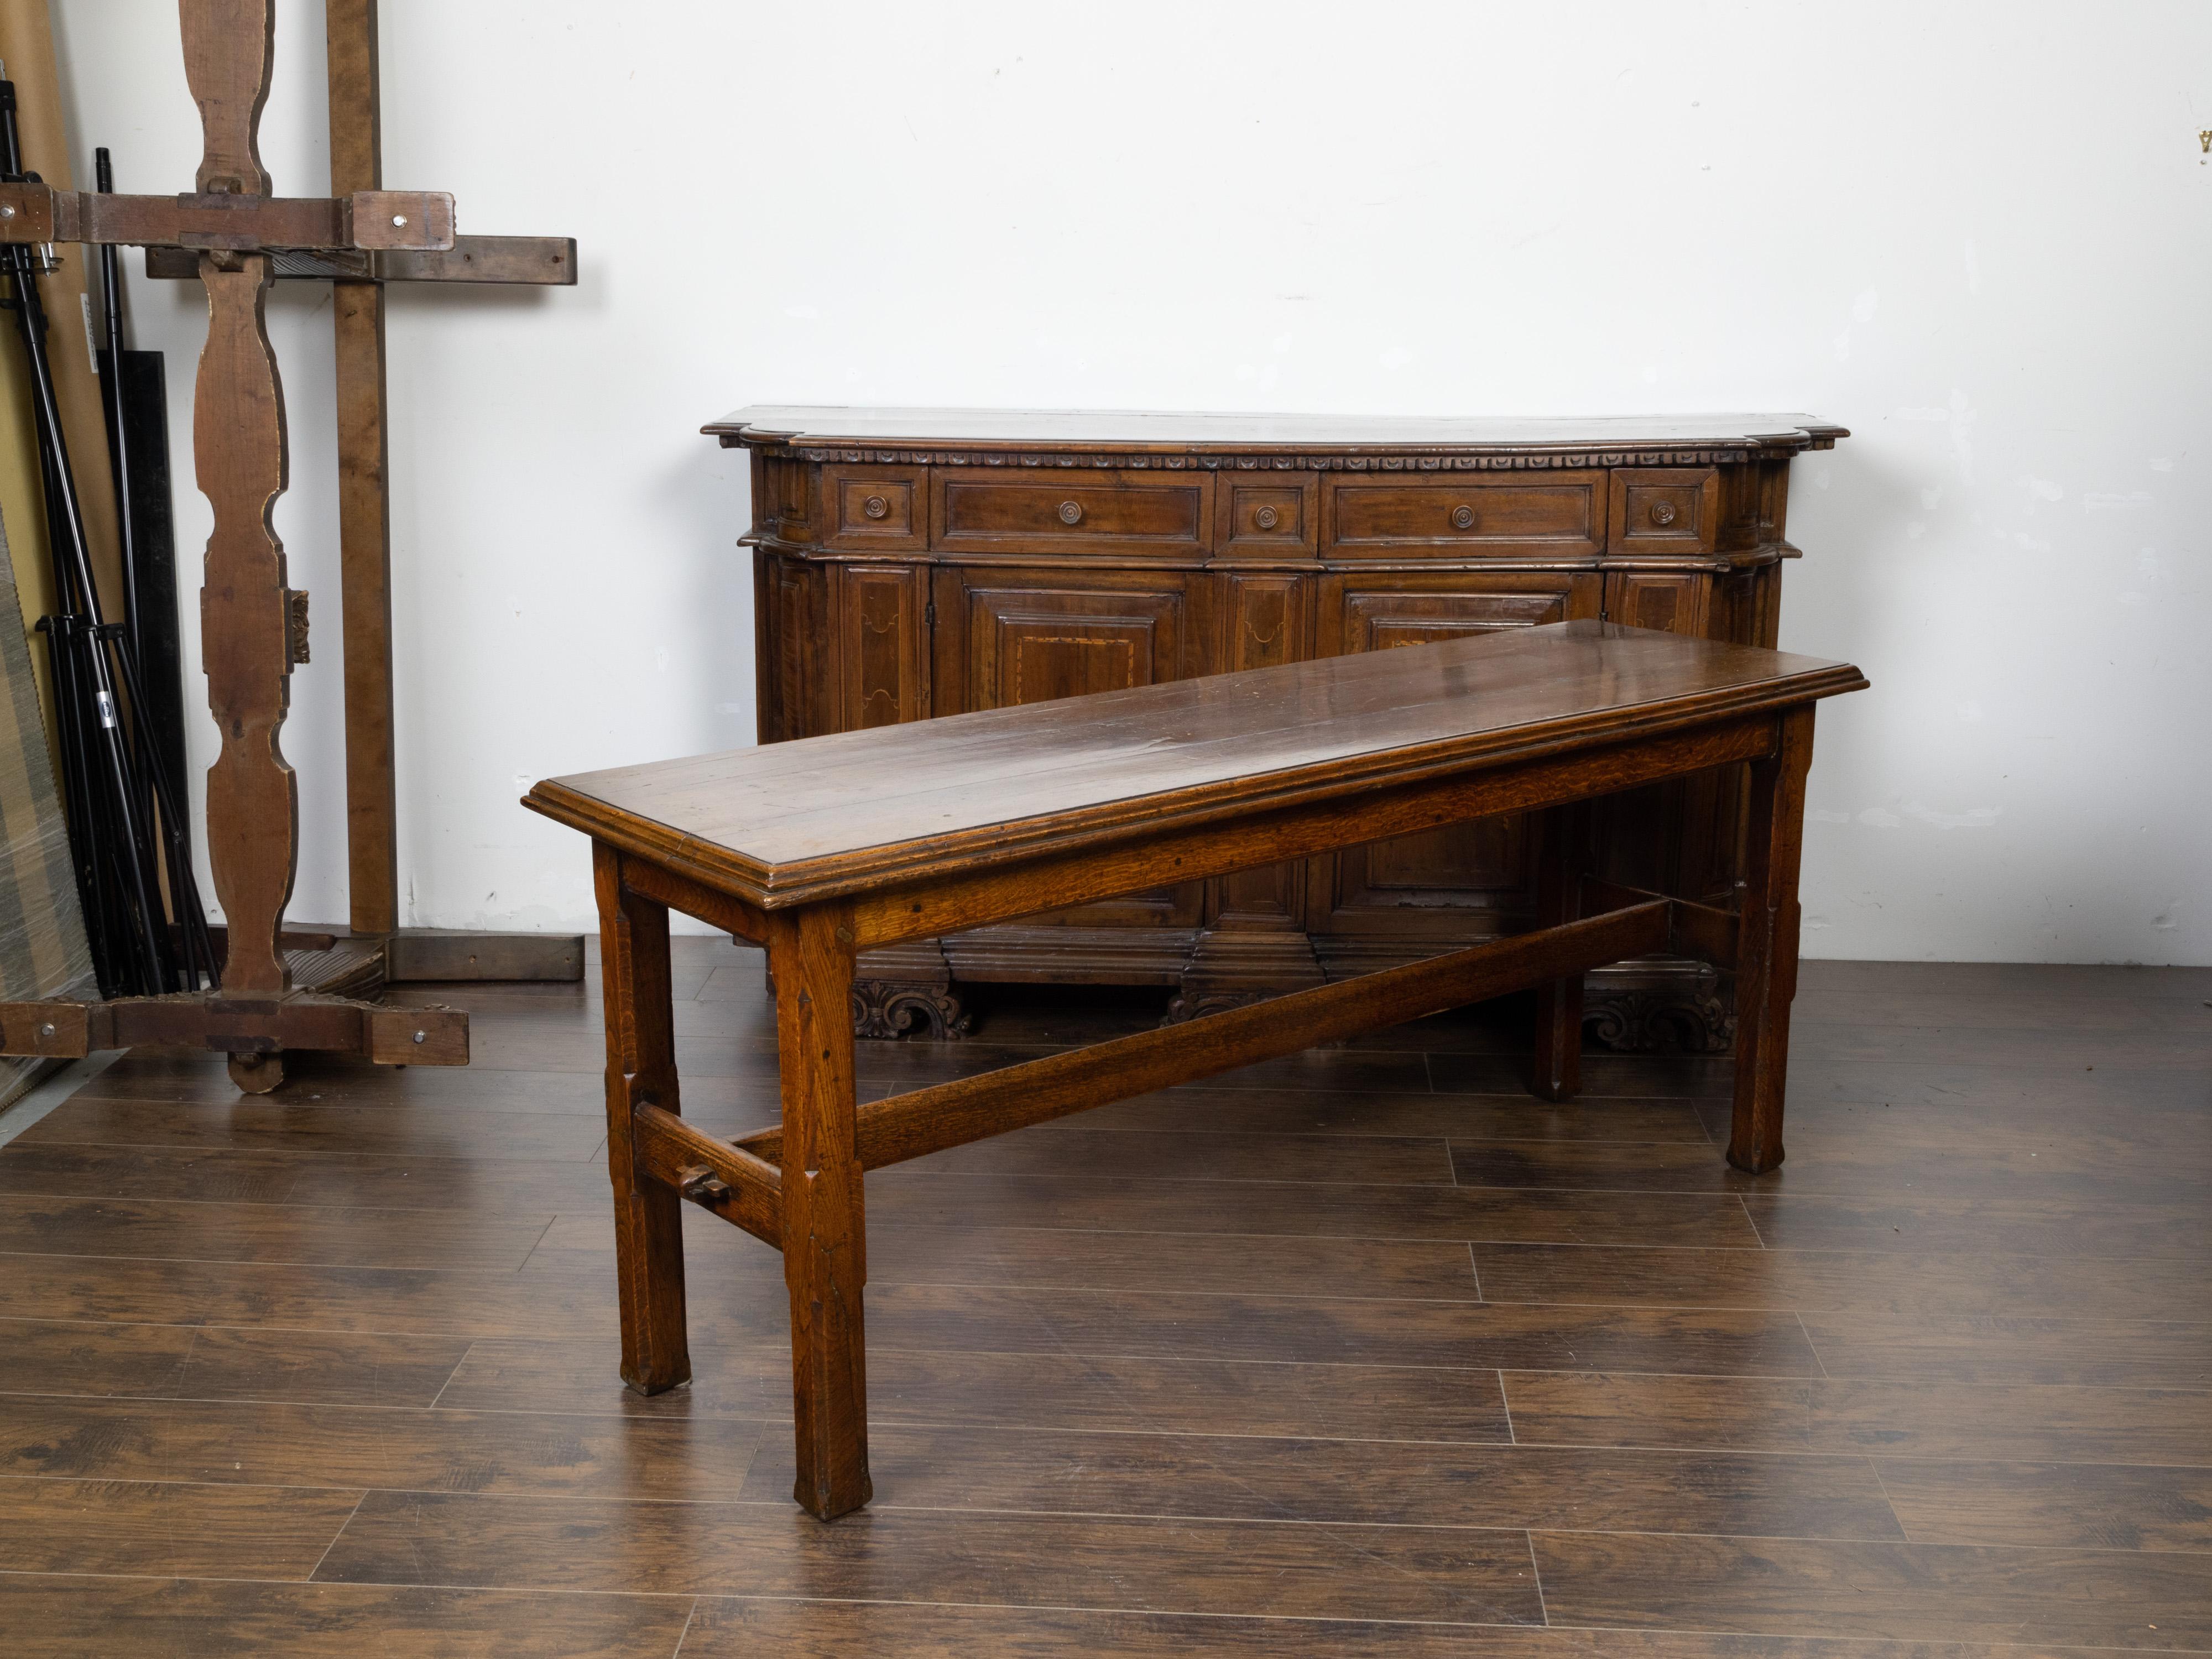 An English oak console table from the 19th century, with straight legs and H-Form cross stretcher. Created in England during the 19th century, this oak table features a rectangular top with stepped edges, sitting above four straight legs with